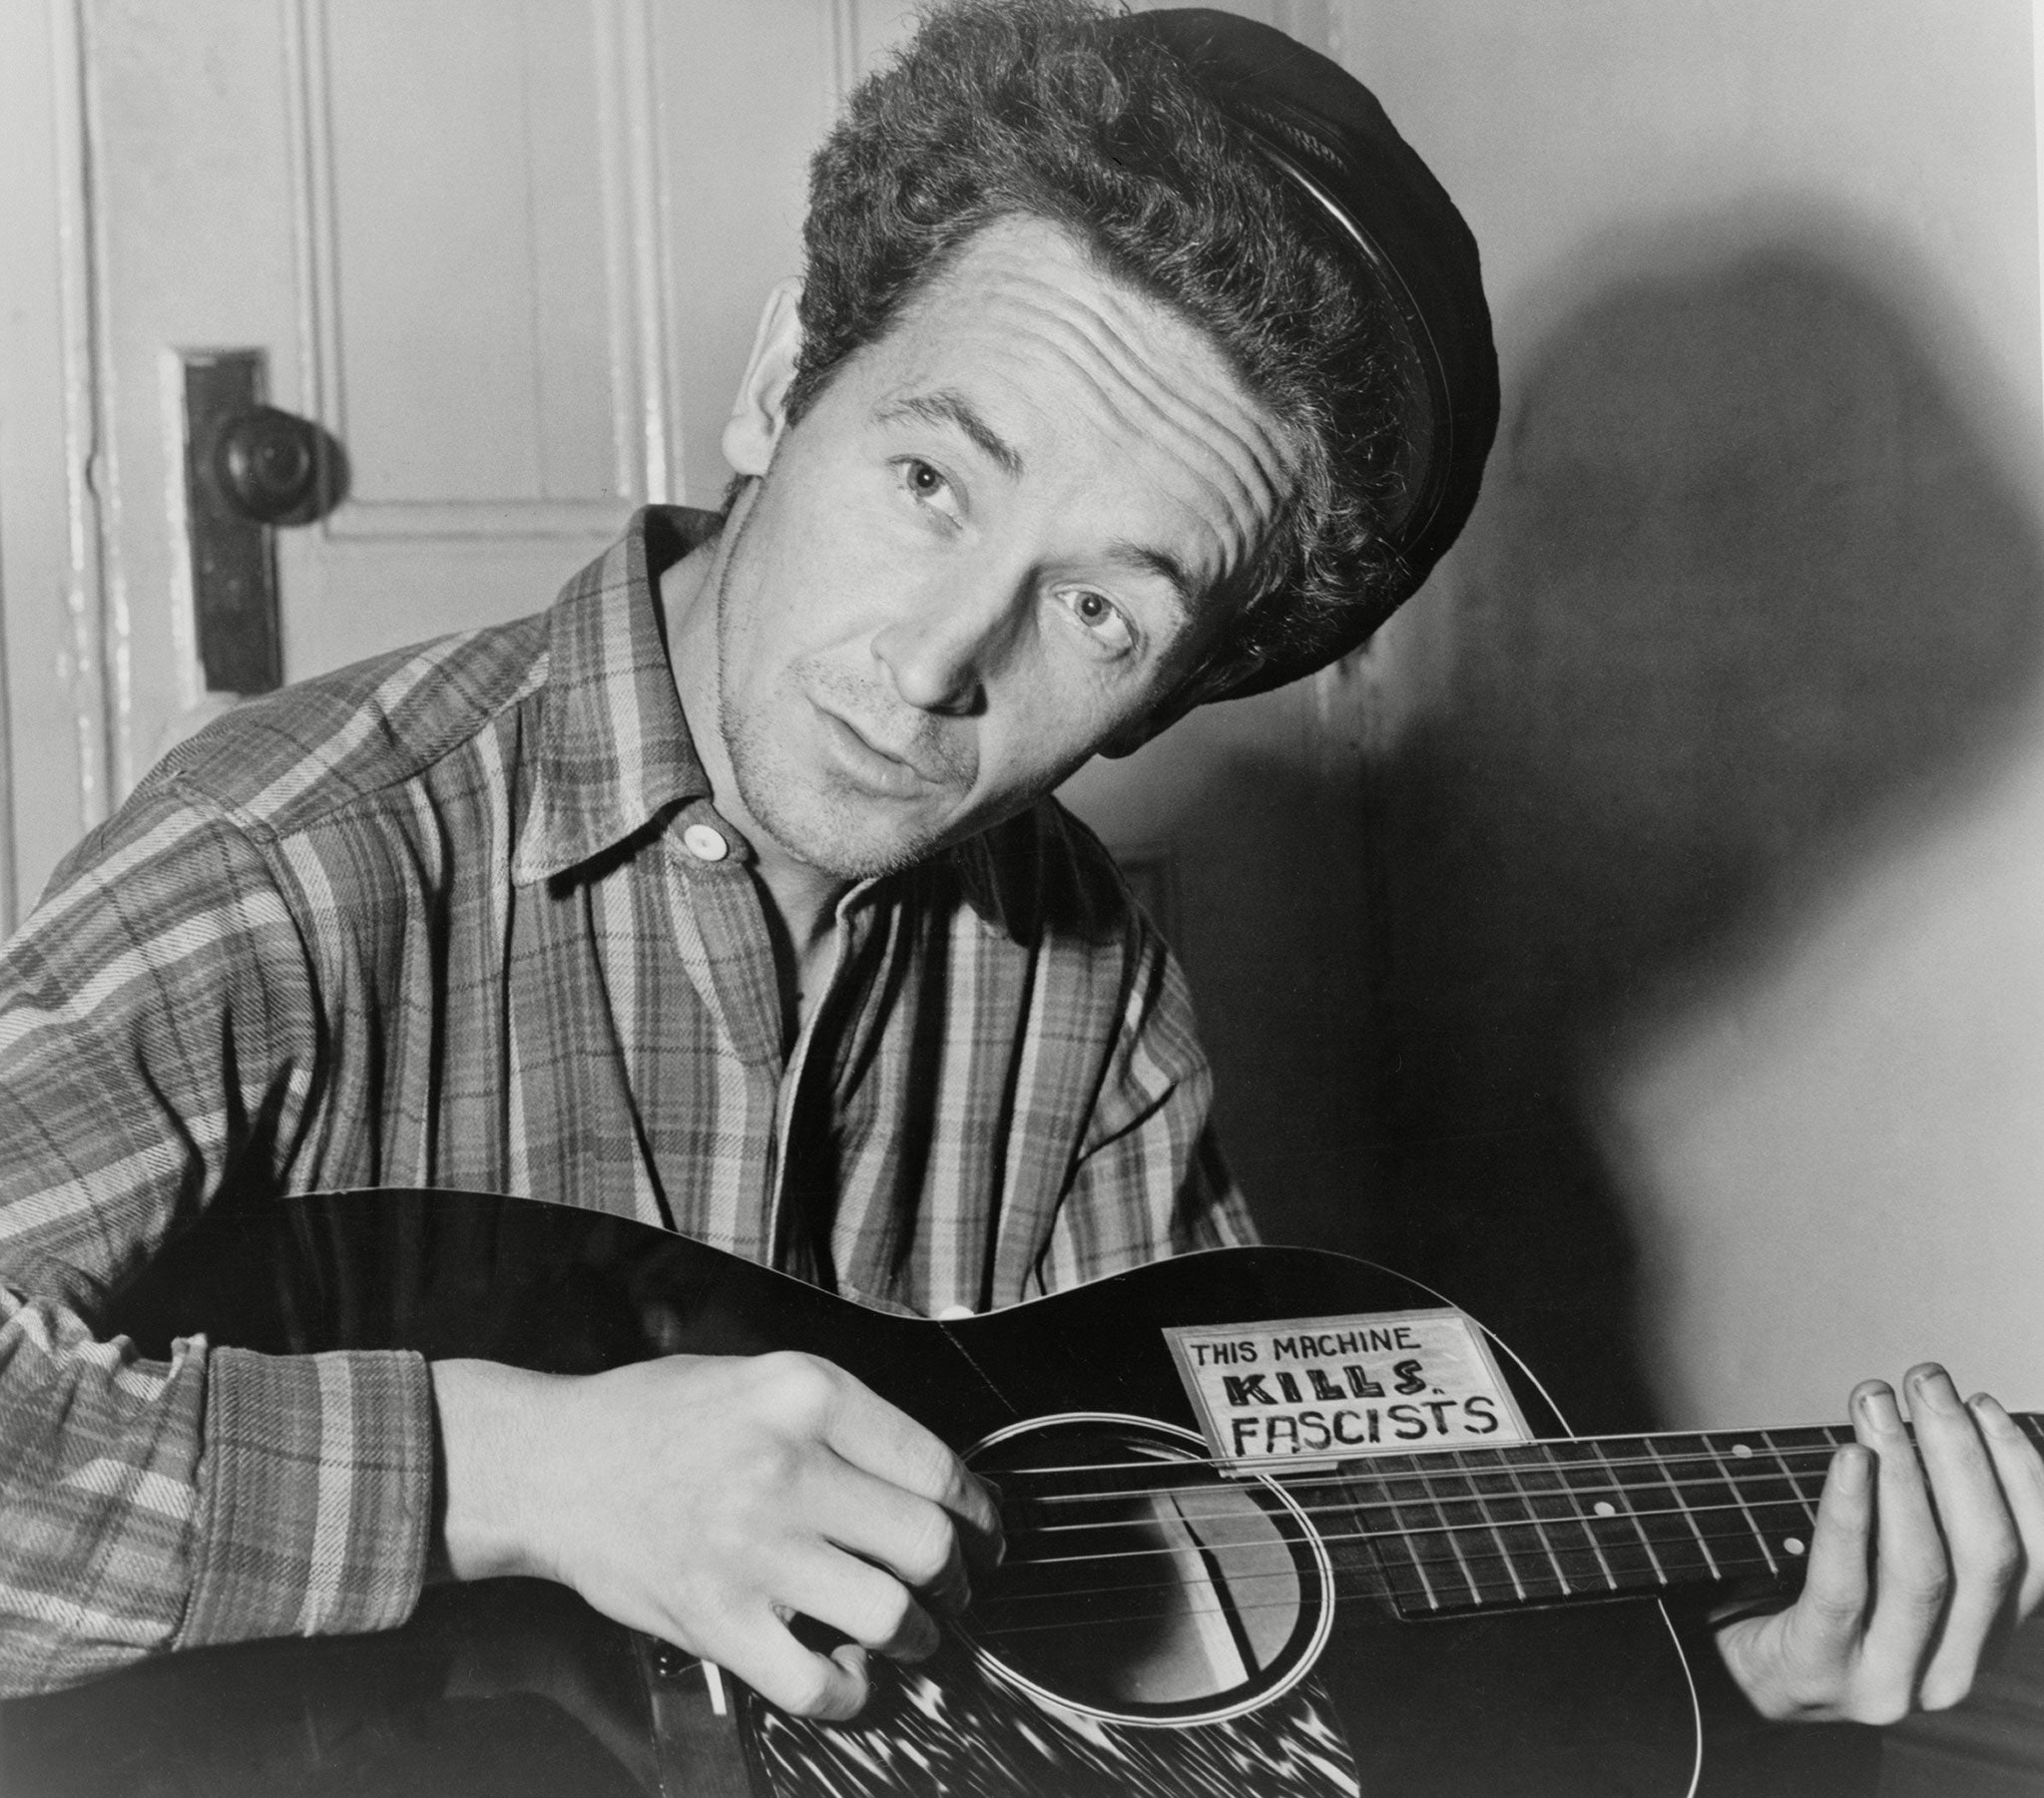 A gang featured in US folk singer Woody Guthrie's autobiographical novel 'Bound for Glory' gave its name to which new wave band of the late 1970s and early '80s?